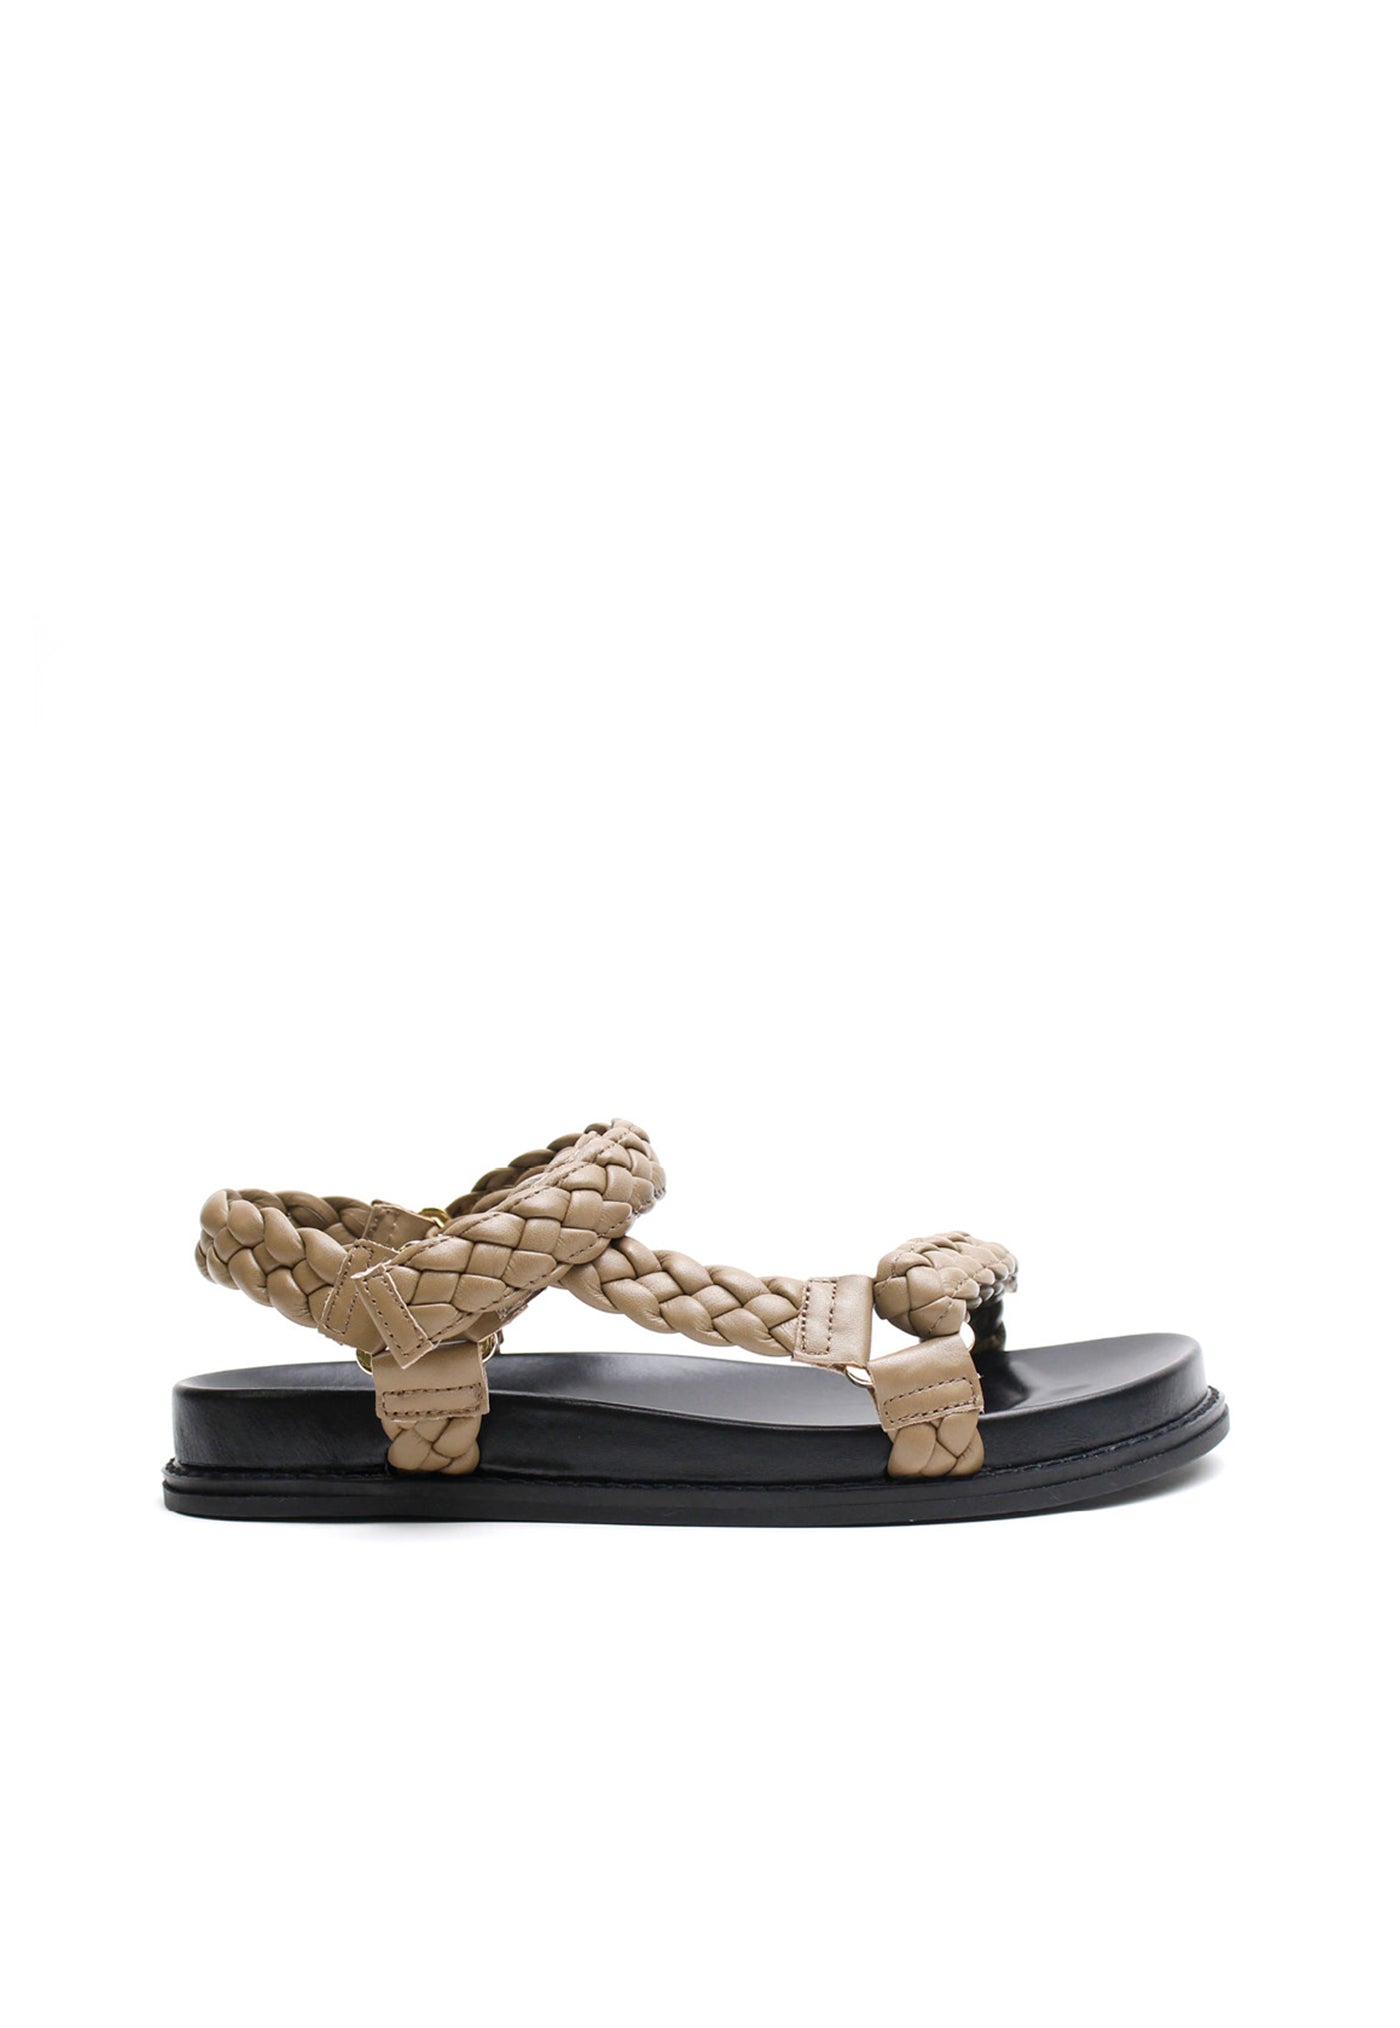 Elke Braided Sandal - Taupe sold by Angel Divine